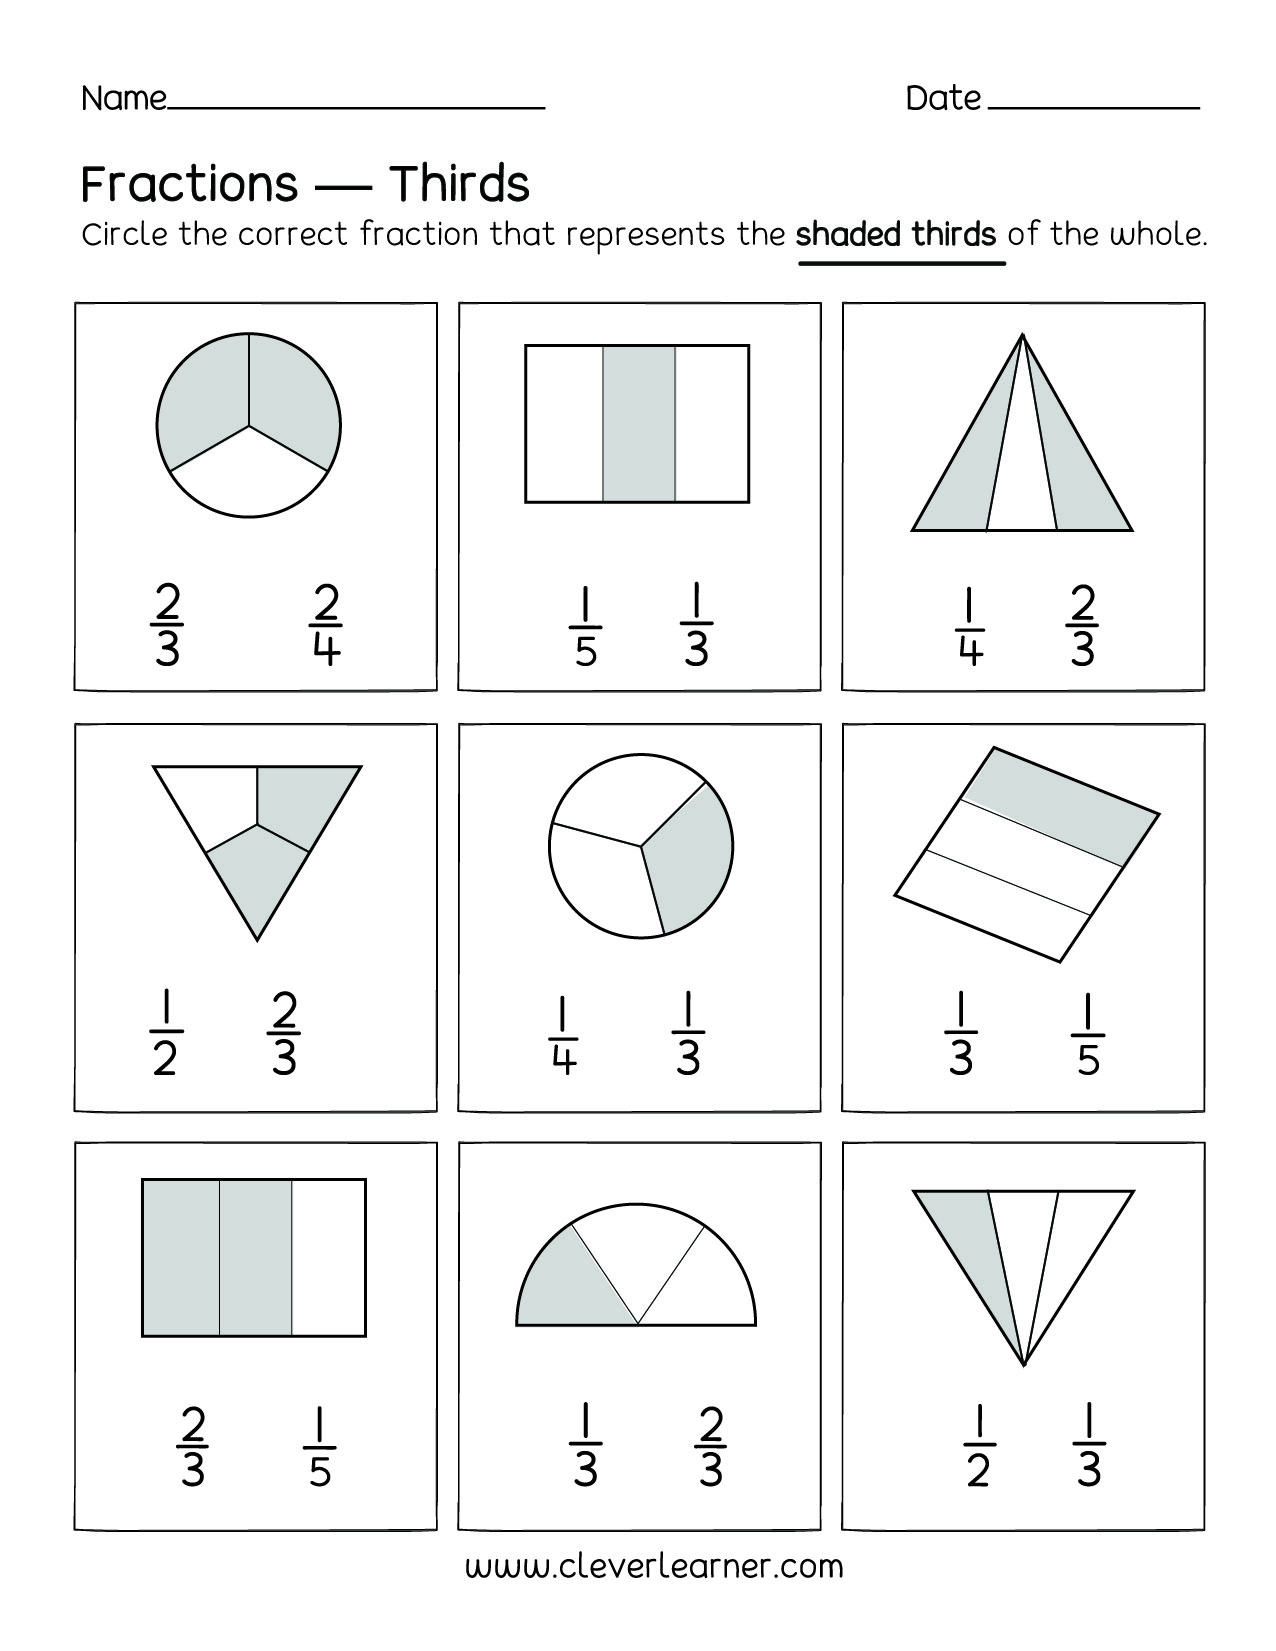 Fun activity on fractions, Thirds worksheets for children